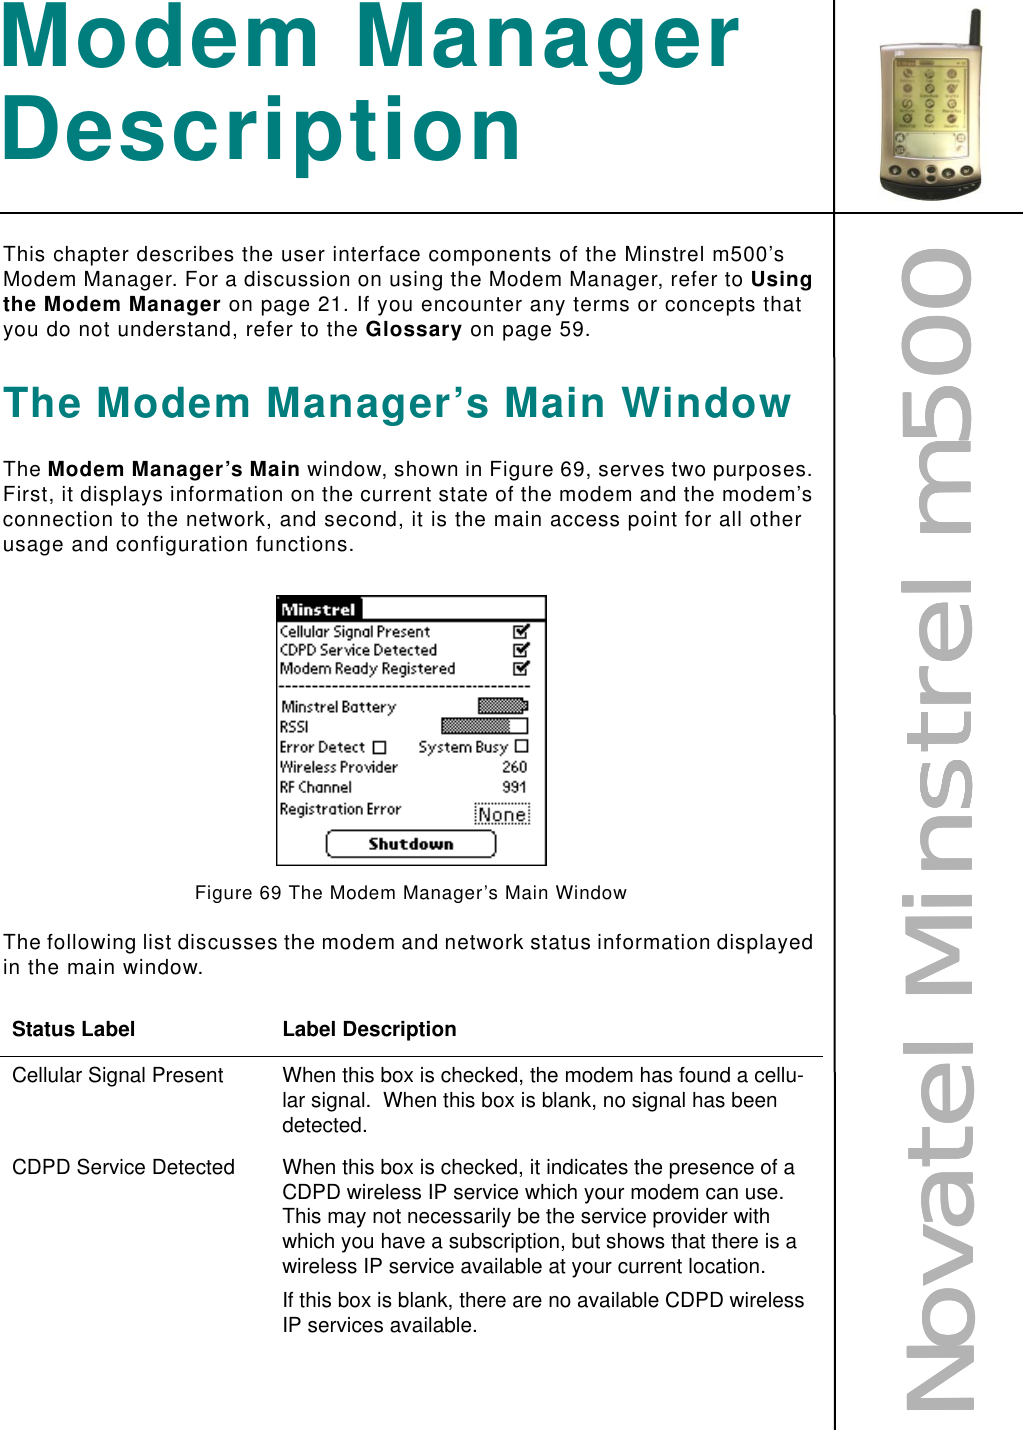 NNNNoooovvvvaaaatttteeeellll    MMMMiiiinnnnssssttttrrrreeeellll    mmmm555500000000Modem Manager DescriptionThis chapter describes the user interface components of the Minstrel m500’s Modem Manager. For a discussion on using the Modem Manager, refer to Using the Modem Manager on page 21. If you encounter any terms or concepts that you do not understand, refer to the Glossary on page 59.The Modem Manager’s Main WindowThe Modem Manager’s Main window, shown in Figure 69, serves two purposes. First, it displays information on the current state of the modem and the modem’s connection to the network, and second, it is the main access point for all other usage and configuration functions.Figure 69 The Modem Manager’s Main WindowThe following list discusses the modem and network status information displayed in the main window.Status Label Label DescriptionCellular Signal Present When this box is checked, the modem has found a cellu-lar signal.  When this box is blank, no signal has been detected.CDPD Service Detected When this box is checked, it indicates the presence of a CDPD wireless IP service which your modem can use.  This may not necessarily be the service provider with which you have a subscription, but shows that there is a wireless IP service available at your current location.If this box is blank, there are no available CDPD wireless IP services available.